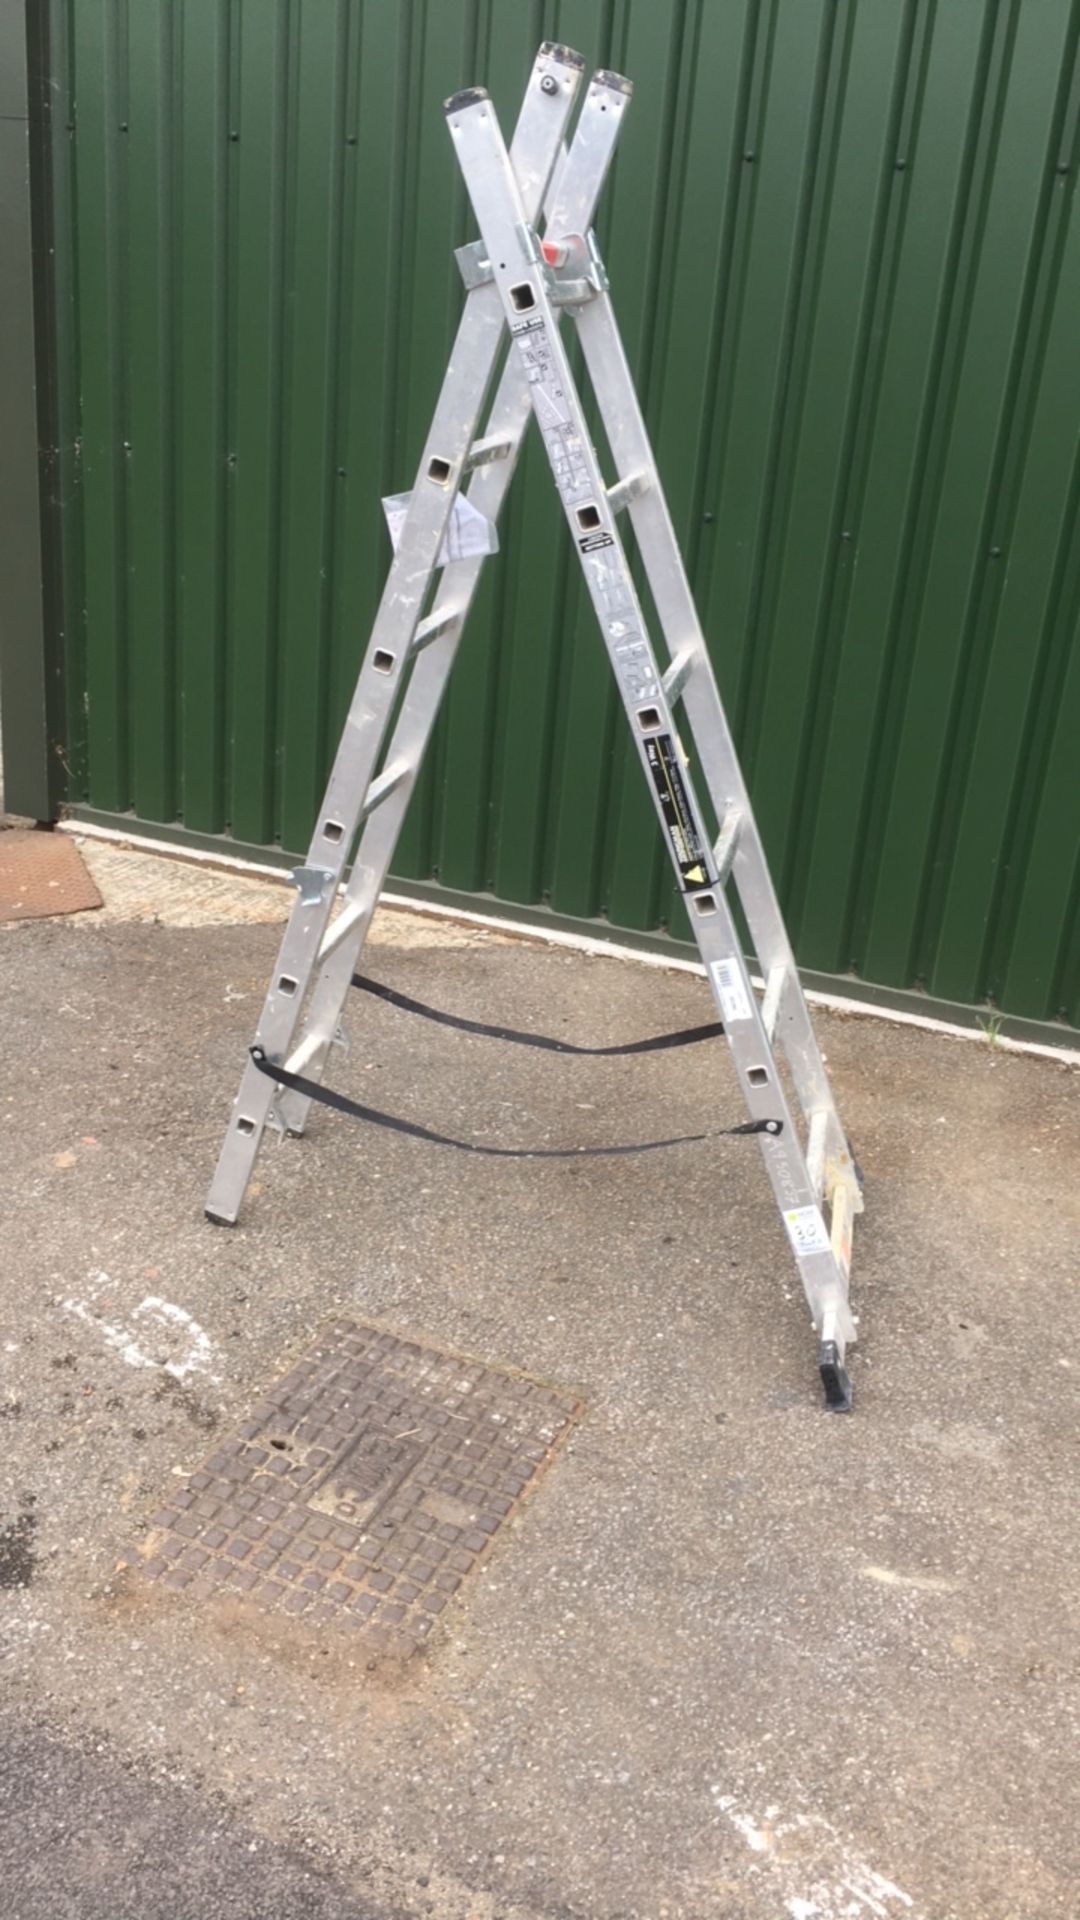 Youngman 3 way combo ladder (A950837)